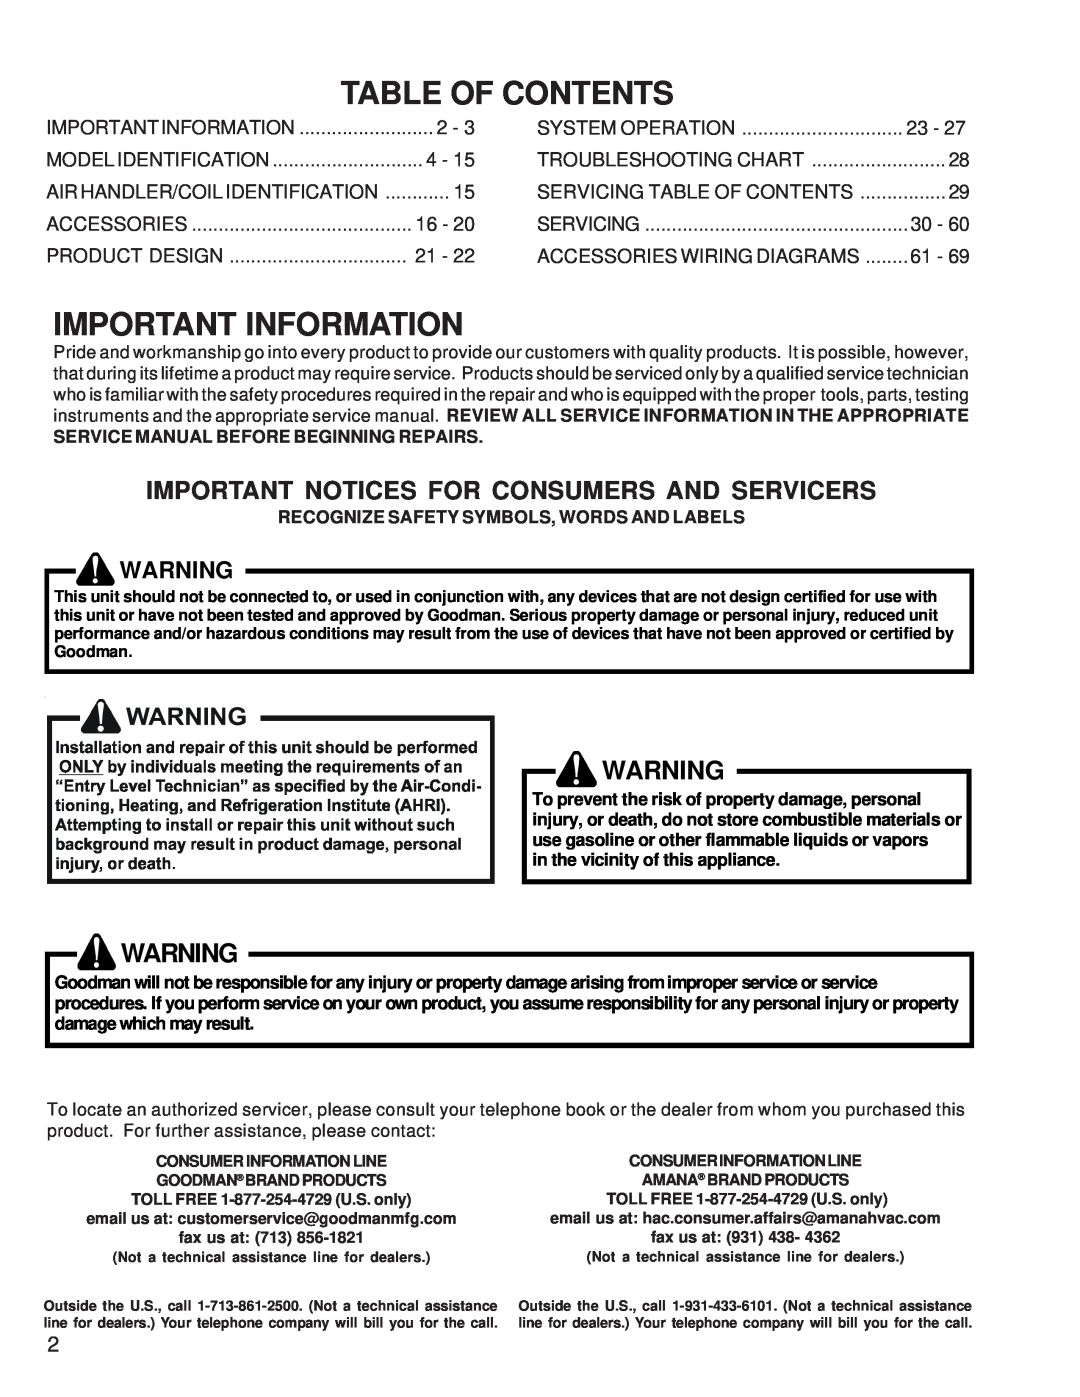 Goodman Mfg RT6100004R13 manual Table Of Contents, Important Information, Important Notices For Consumers And Servicers 